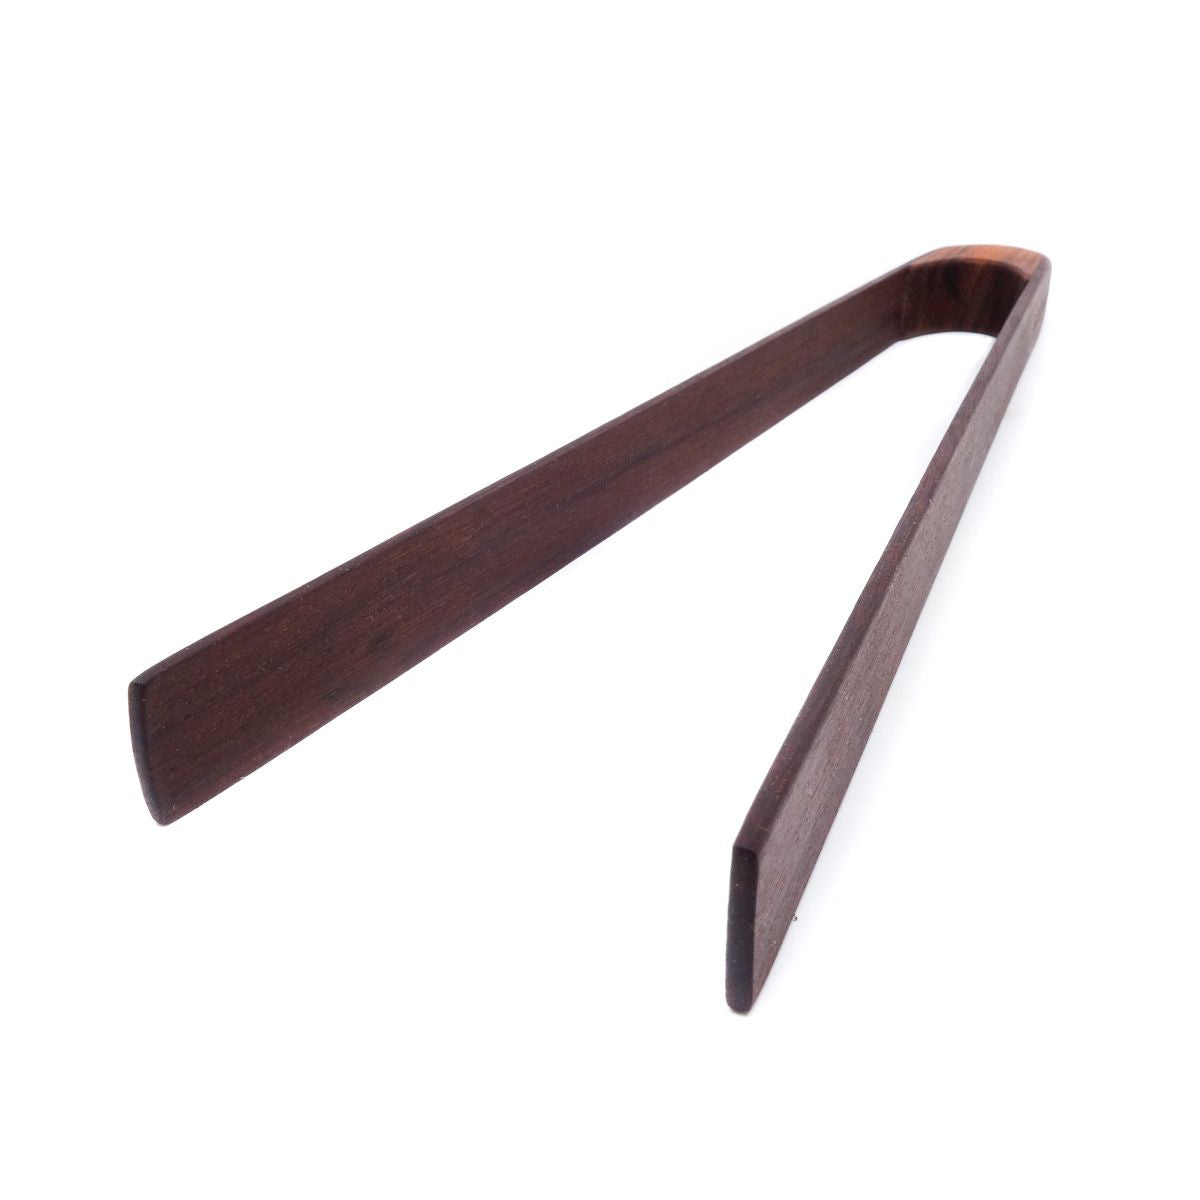 Wooden tongs gift for men who love to grill